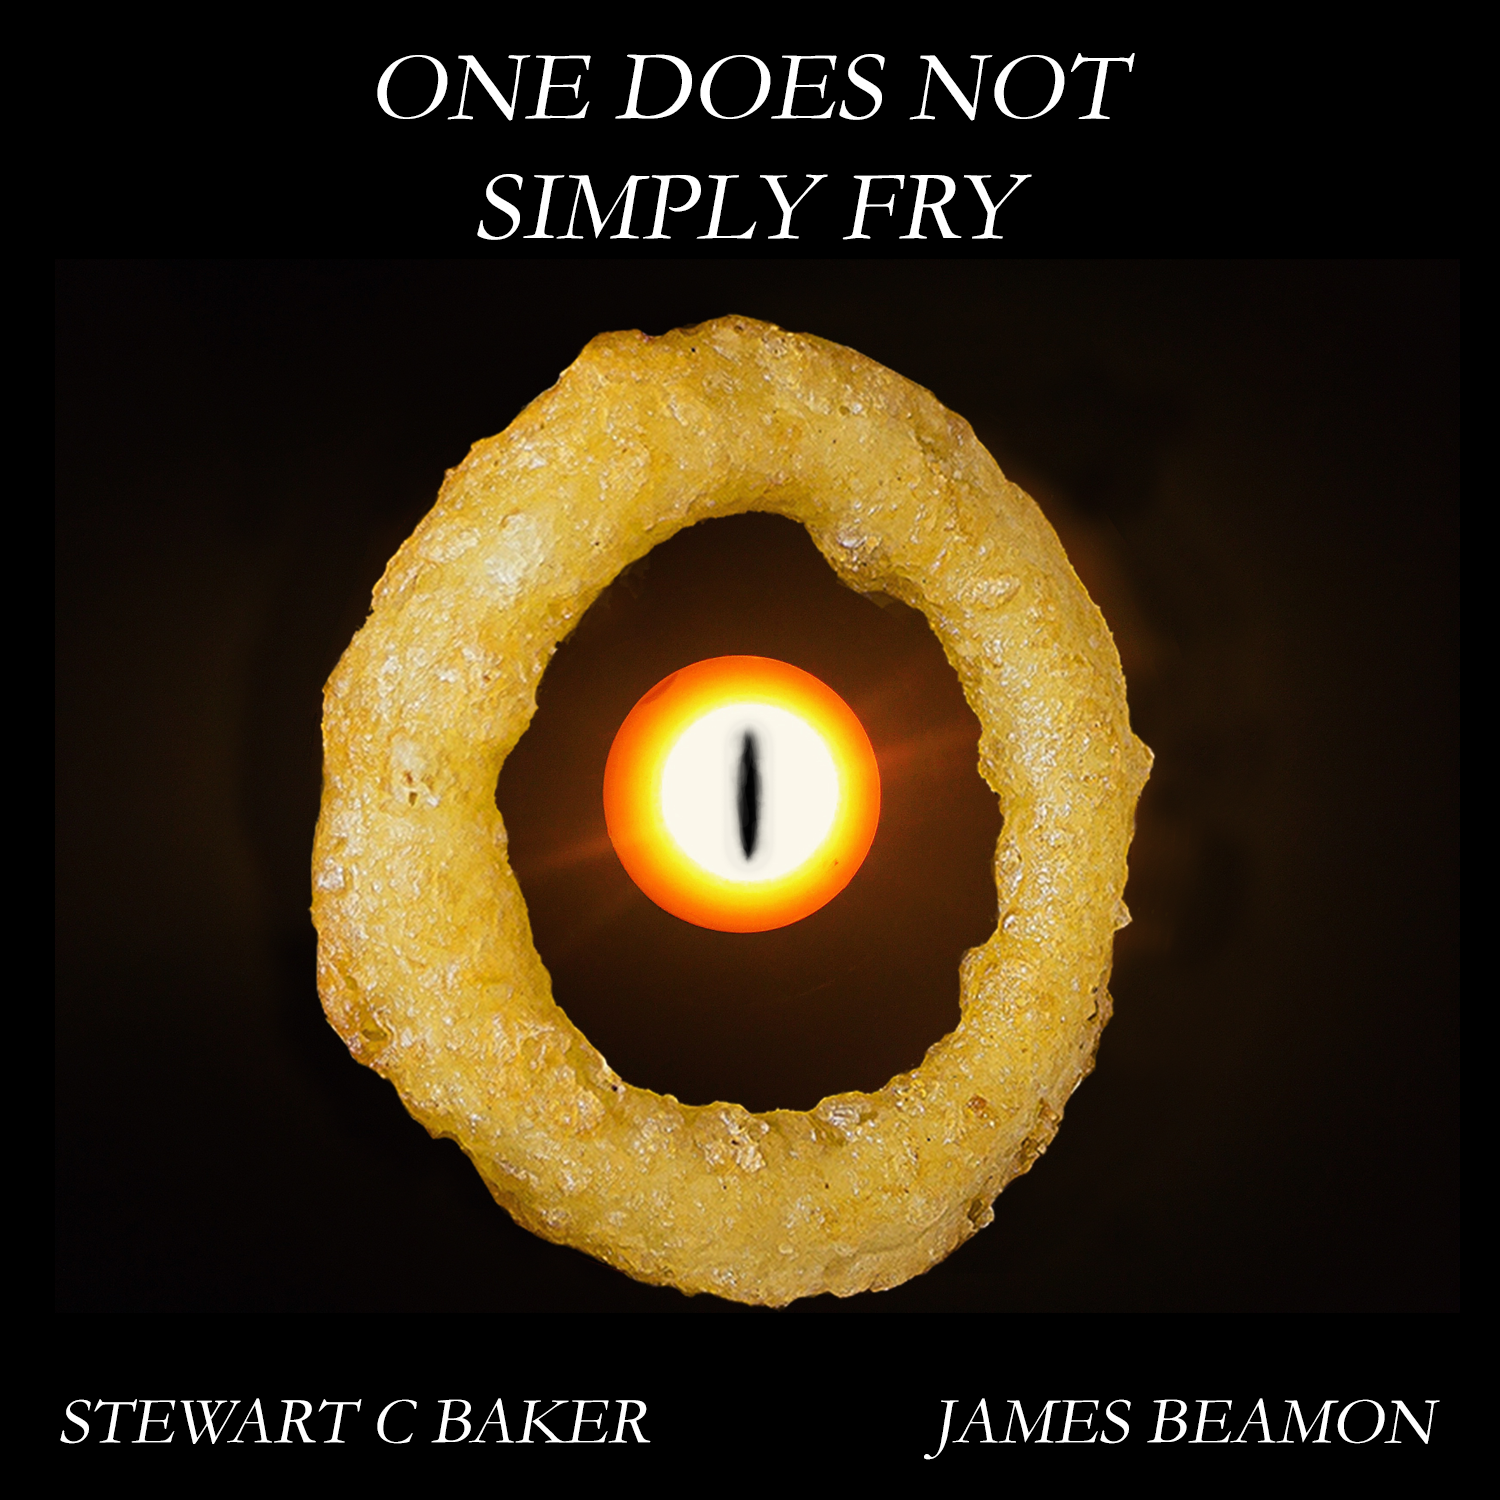 An onion ring floats on a black background, with a glowing orange eye staring out from the center